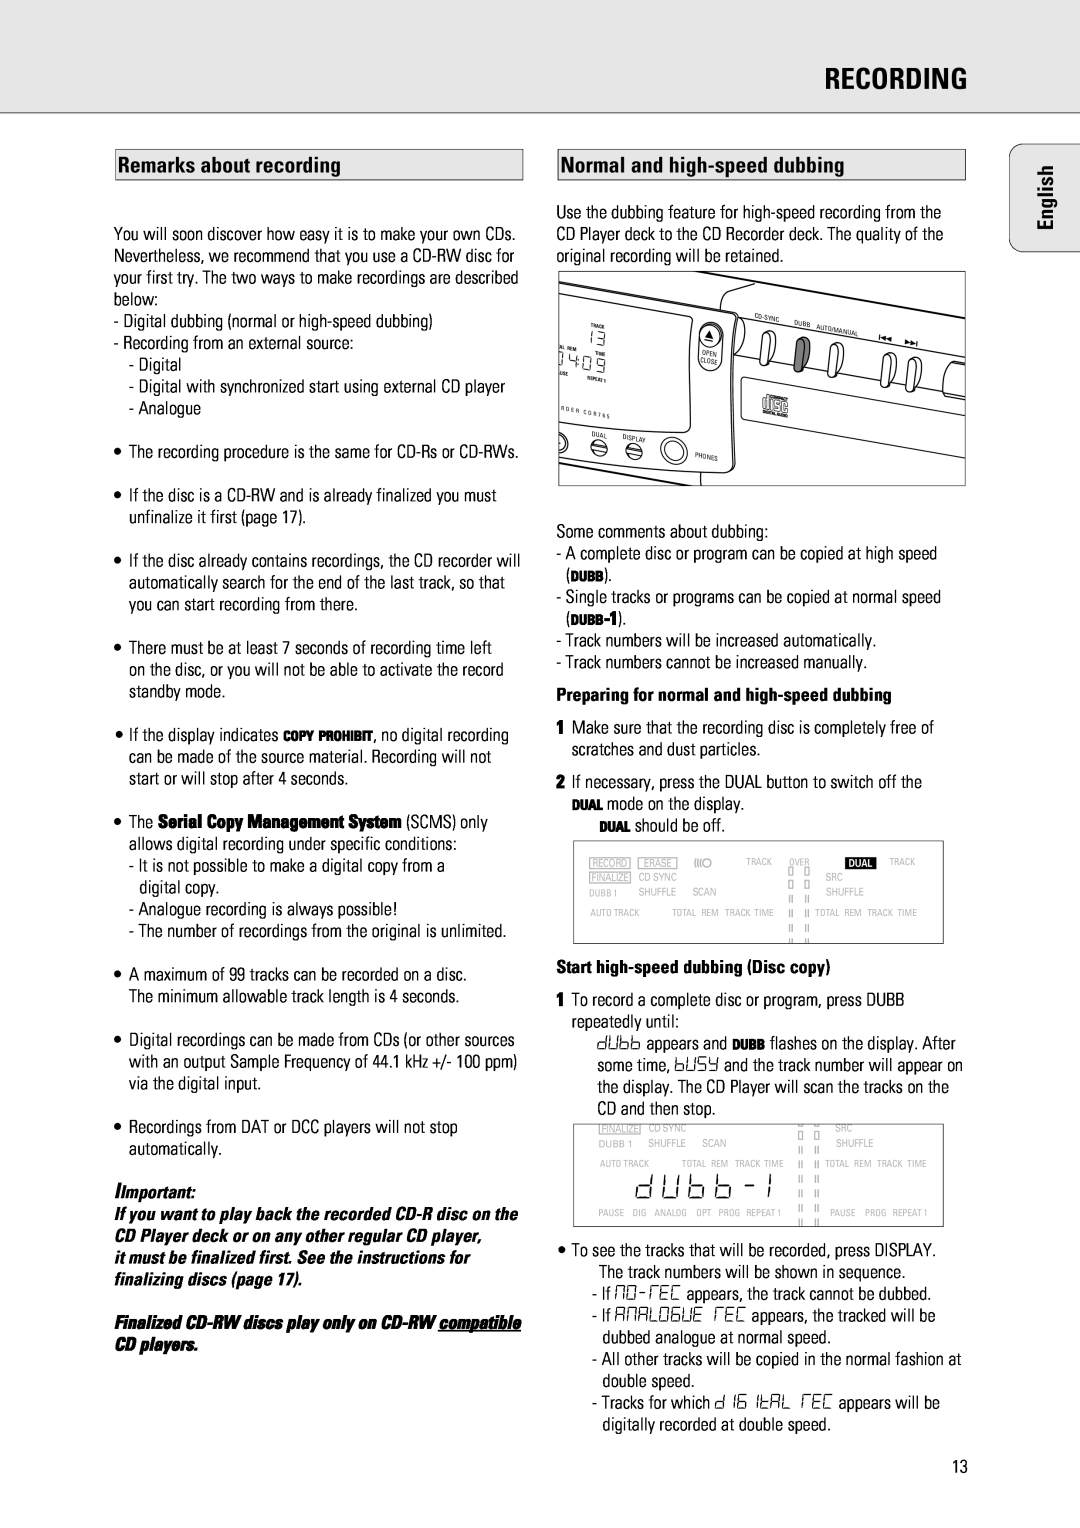 Philips 765 manual Recording, Remarks about recording, Normal and high-speeddubbing, IImportant, English 